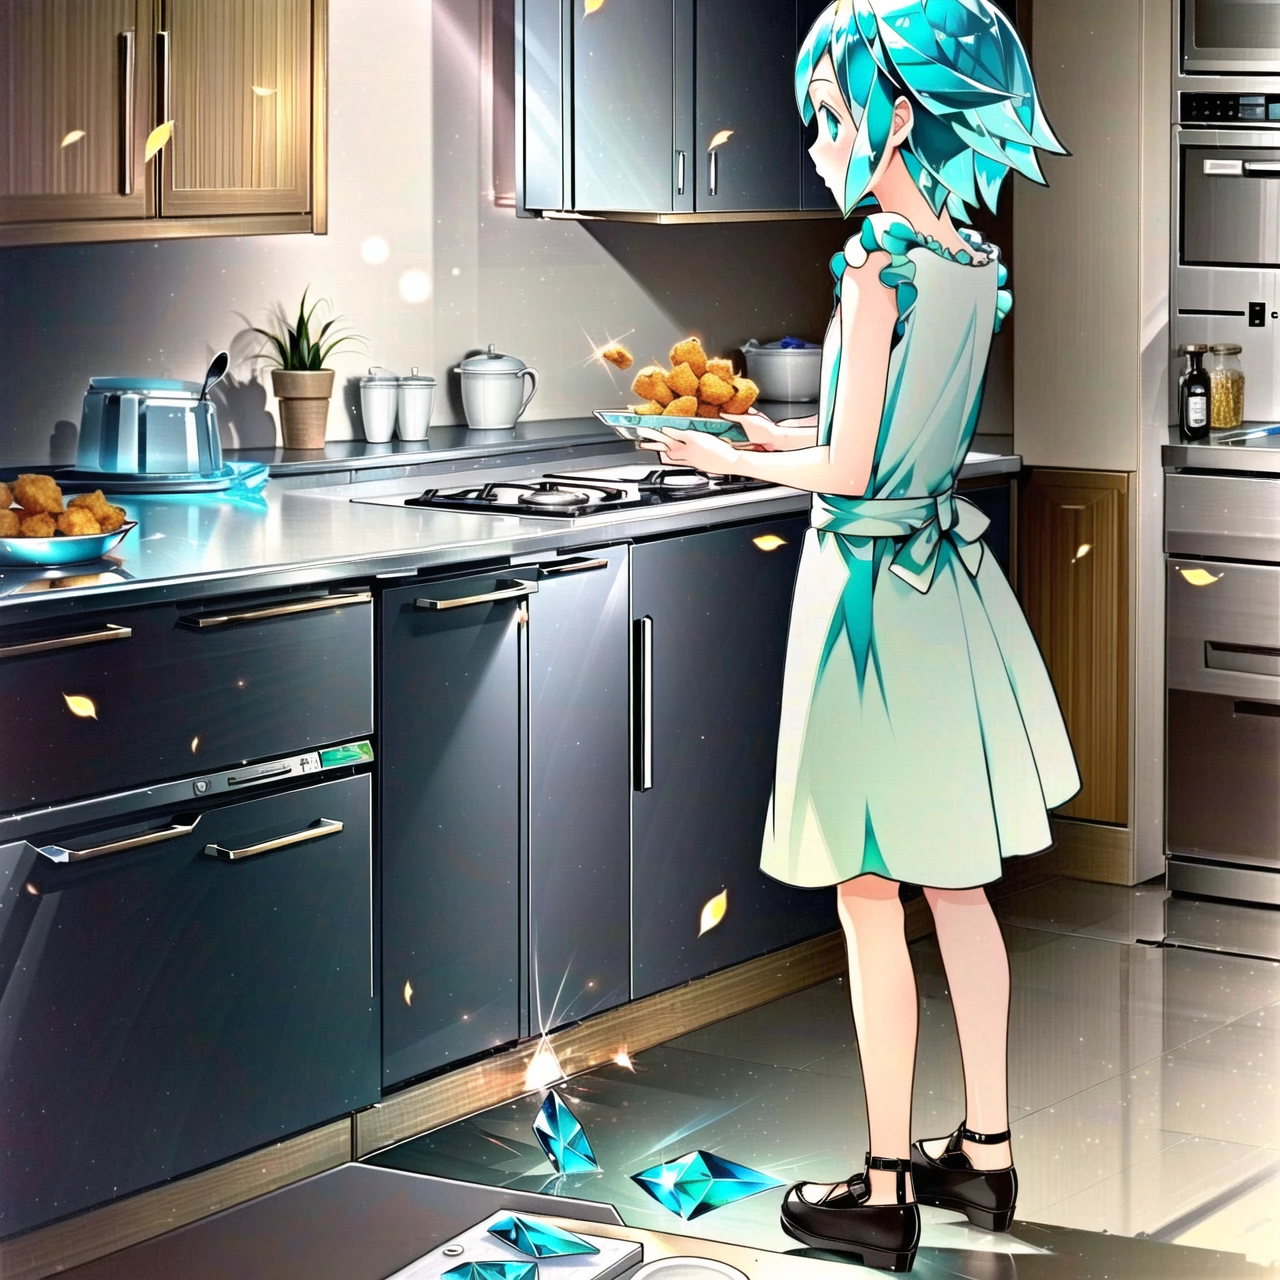 phosphophyllite, phos, wide-eyed, standing, light diffraction, full_body, light diffraction, refraction, hair made of glass, cooking, kitchen, chickennuggets